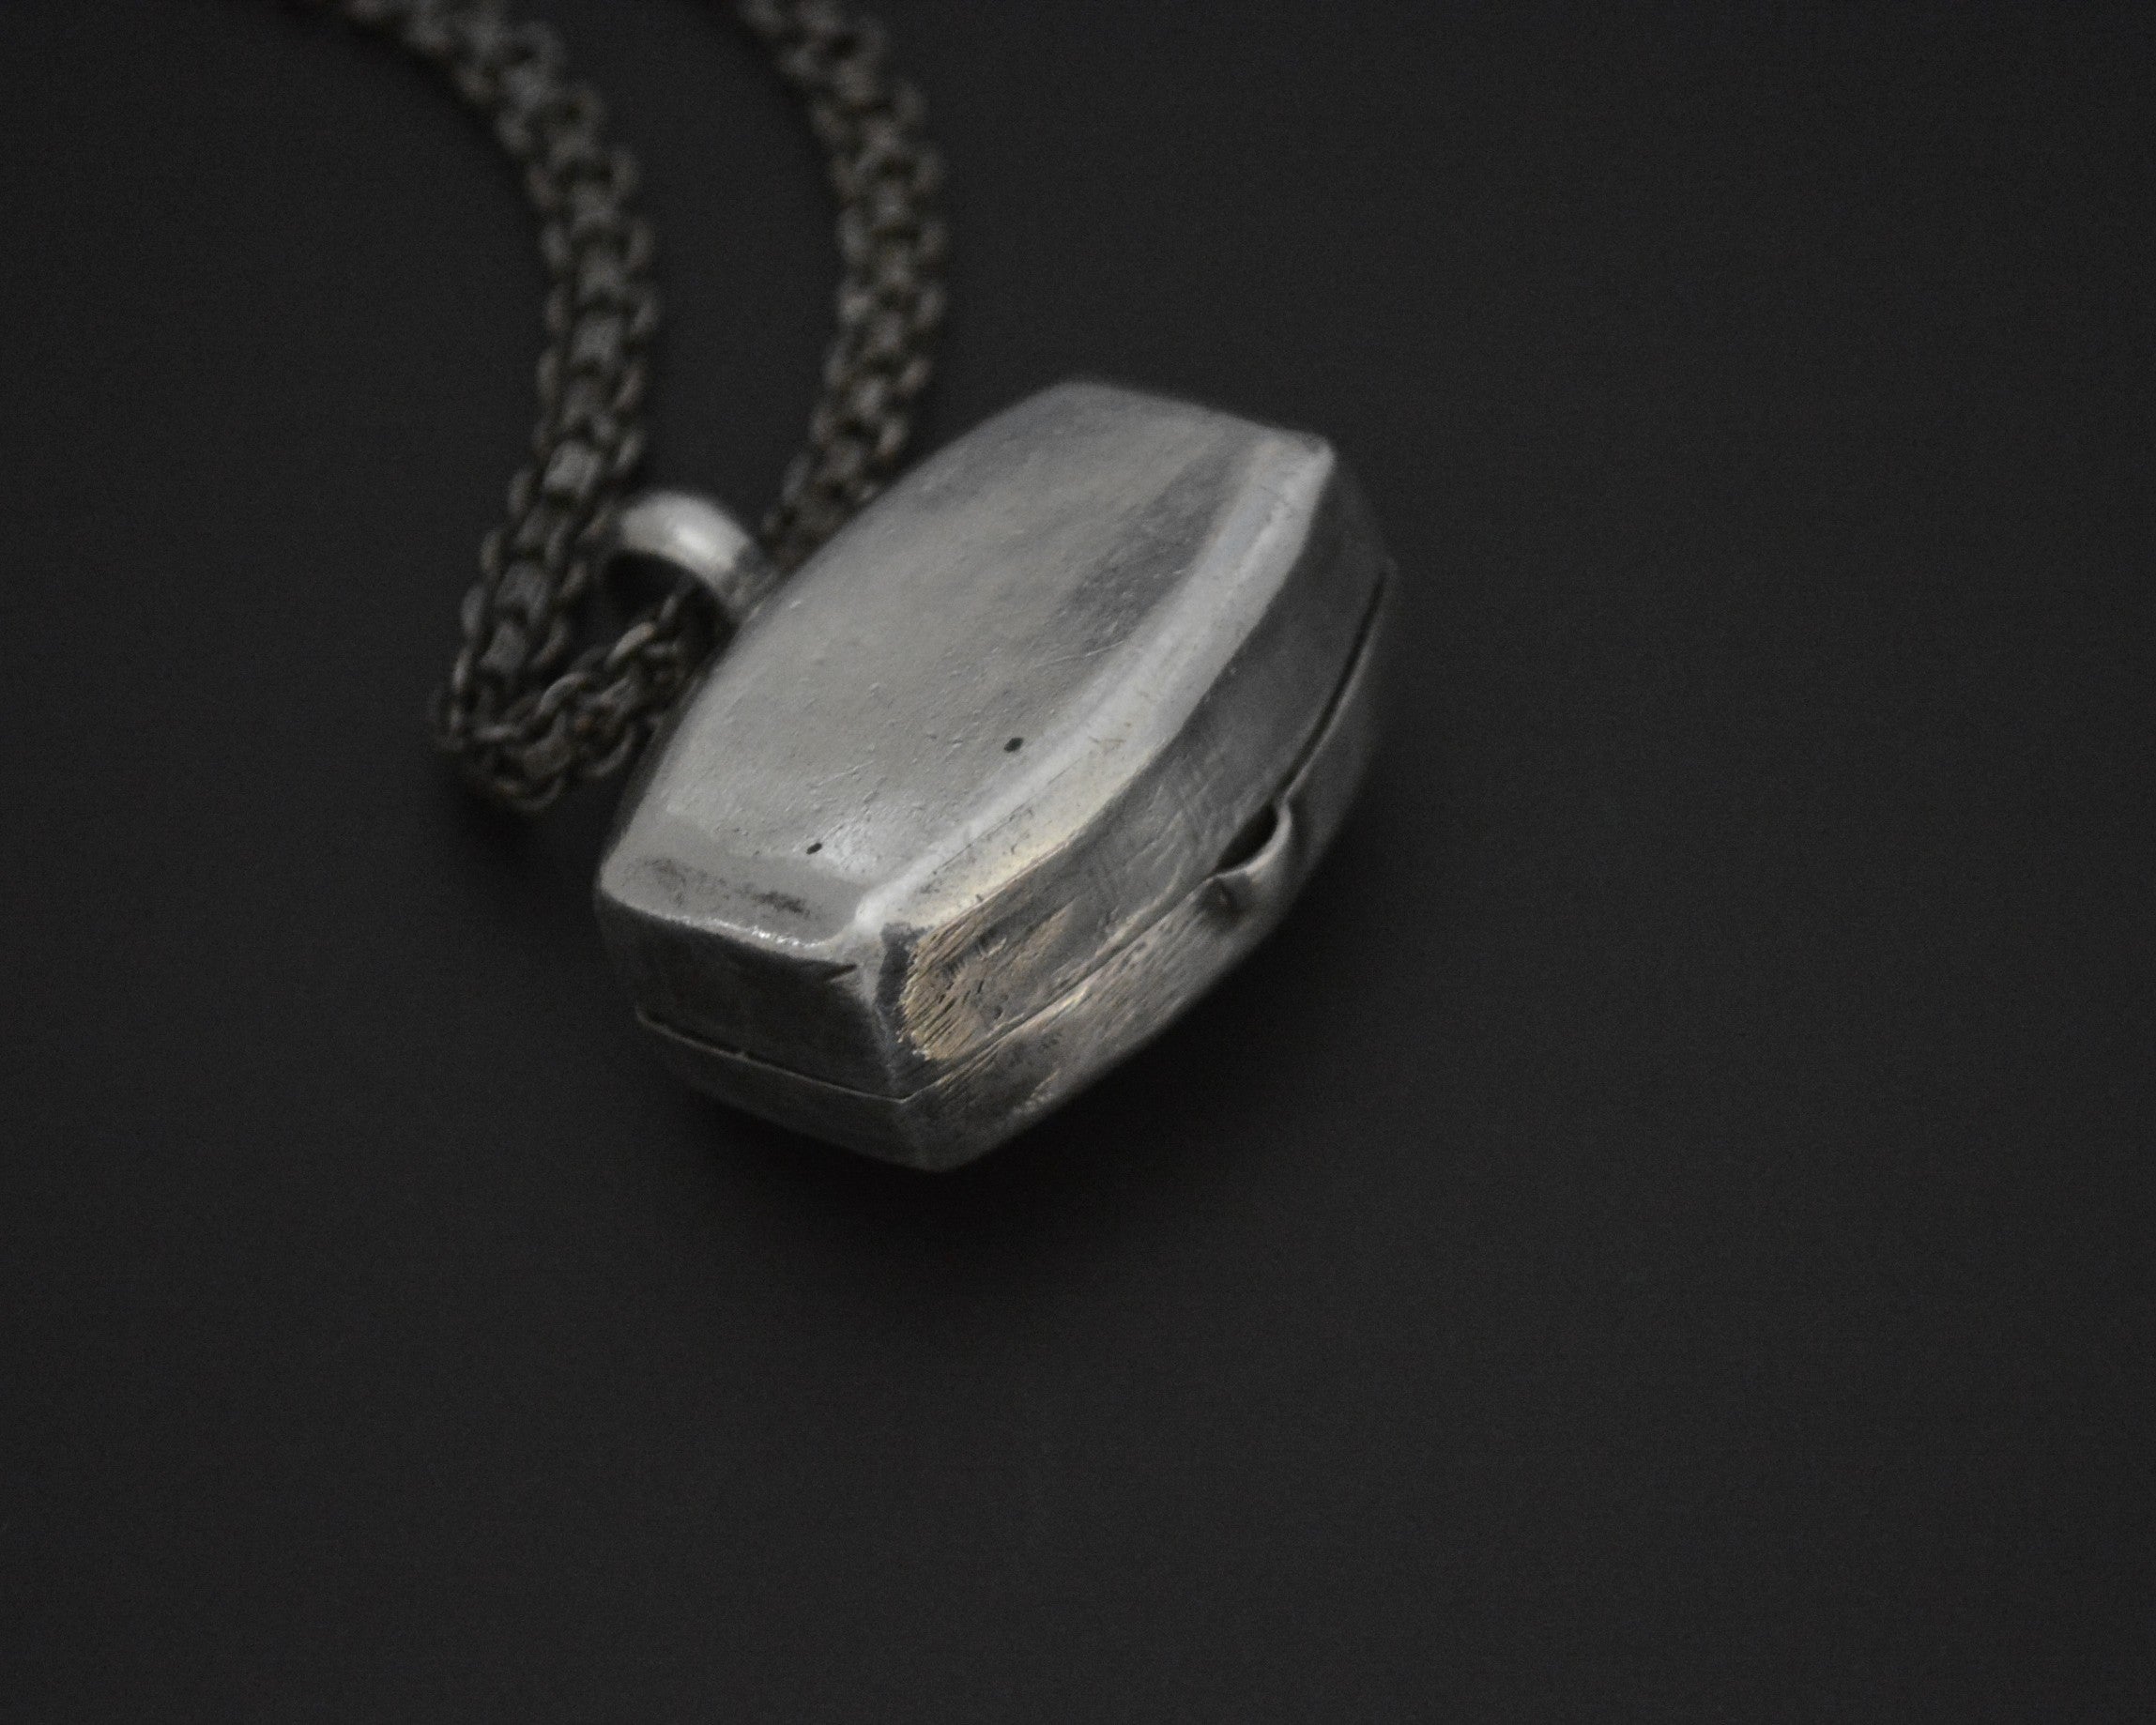 Indian Silver Box Pendant on Chain